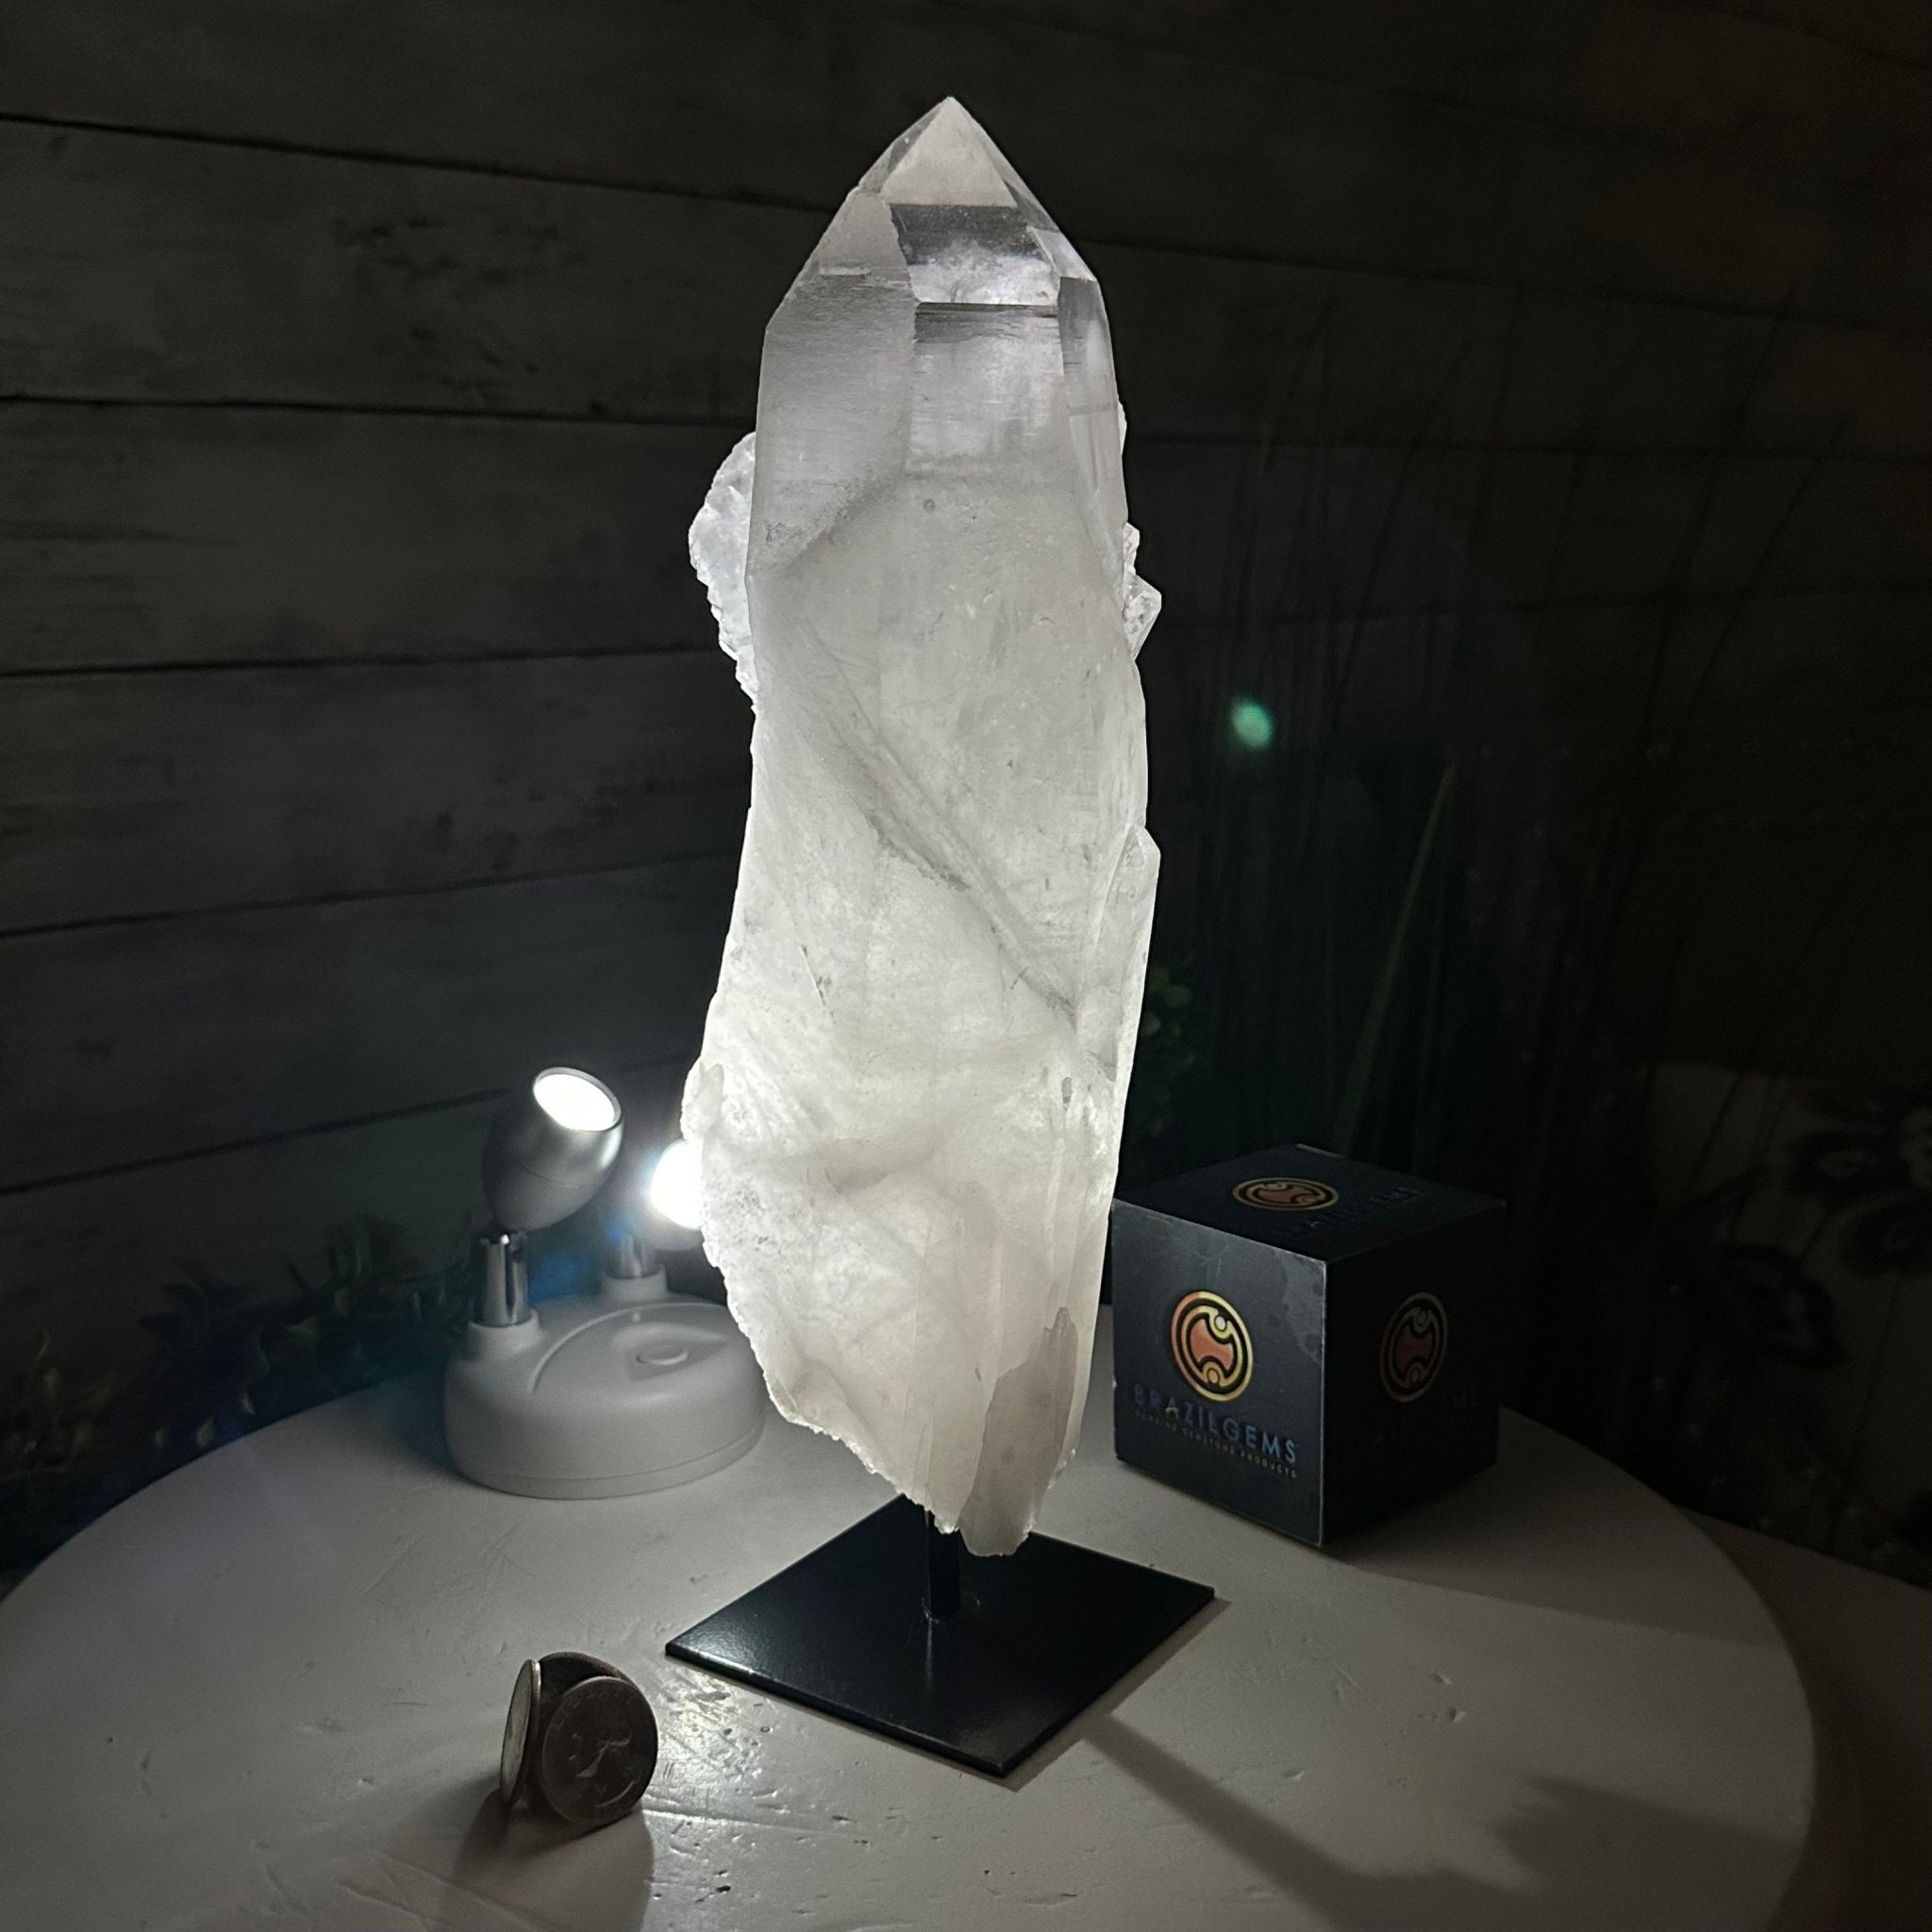 Clear Quartz Crystal Point on Fixed Base, 4.9 lbs & 11.5" Tall #3122CQ-009 - Brazil GemsBrazil GemsClear Quartz Crystal Point on Fixed Base, 4.9 lbs & 11.5" Tall #3122CQ-009Crystal Points3122CQ-009